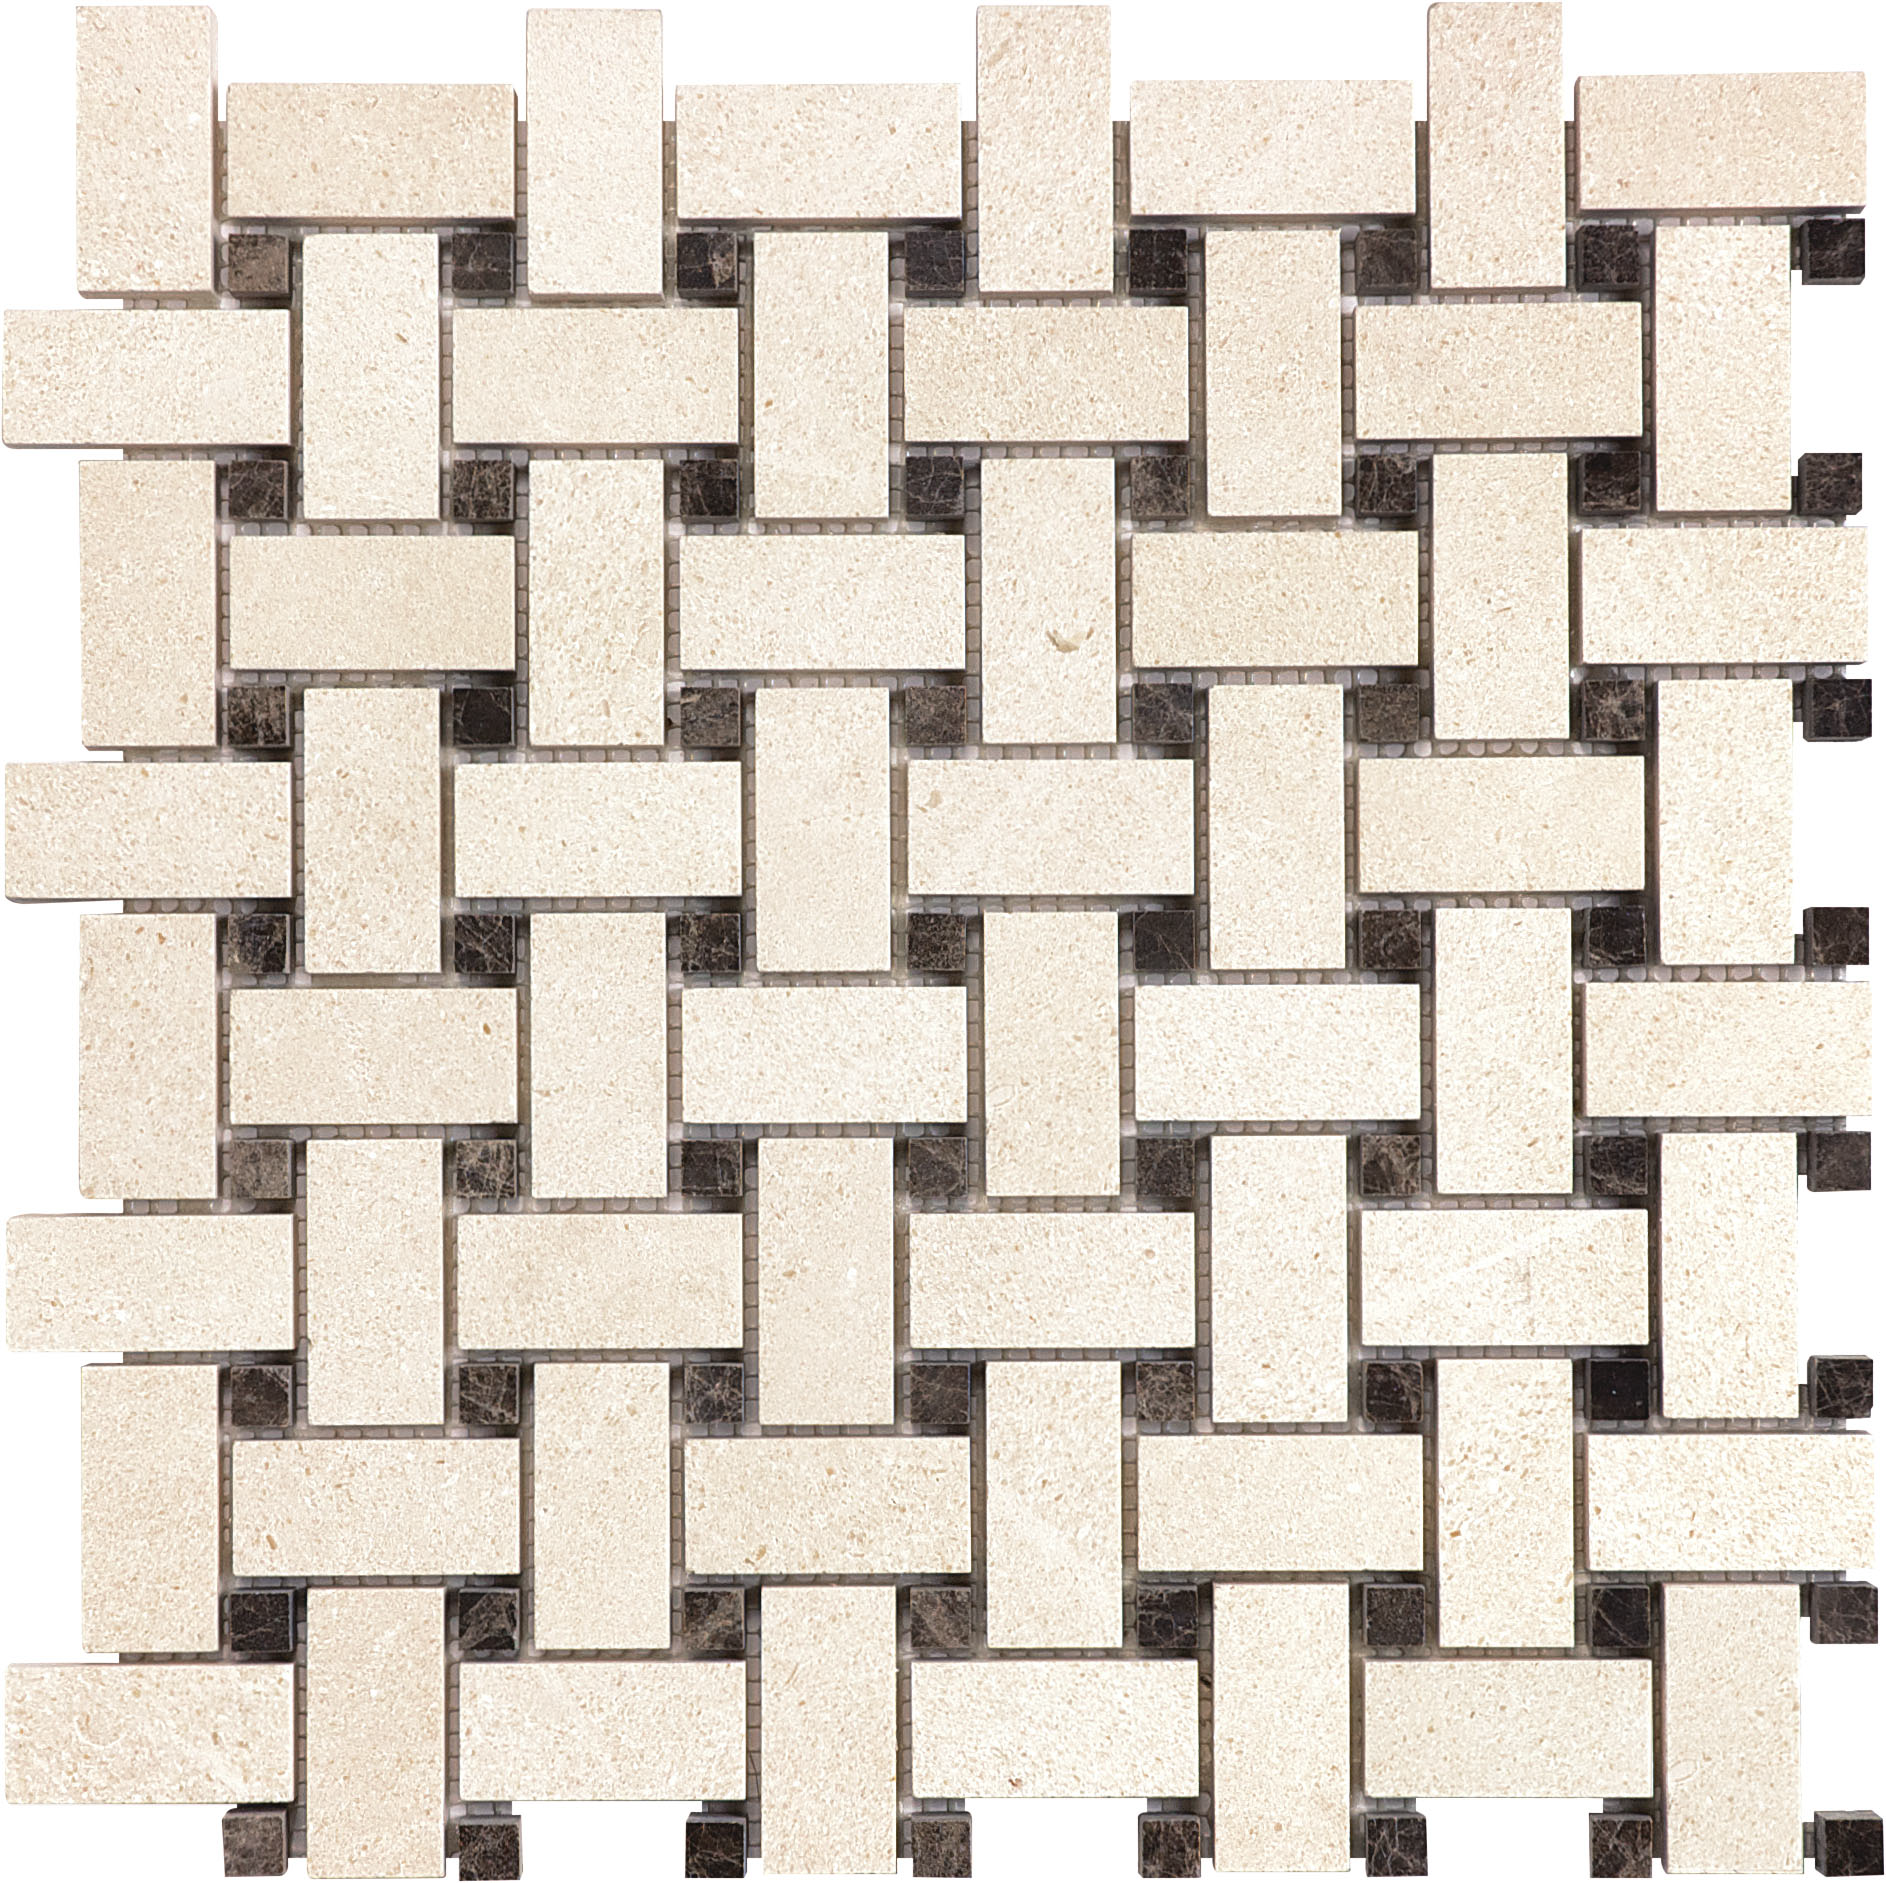 limestone basketweave 2x2-inch pattern natural stone mosaic from serene ivory anatolia collection distributed by surface group international honed finish straight edge edge mesh shape